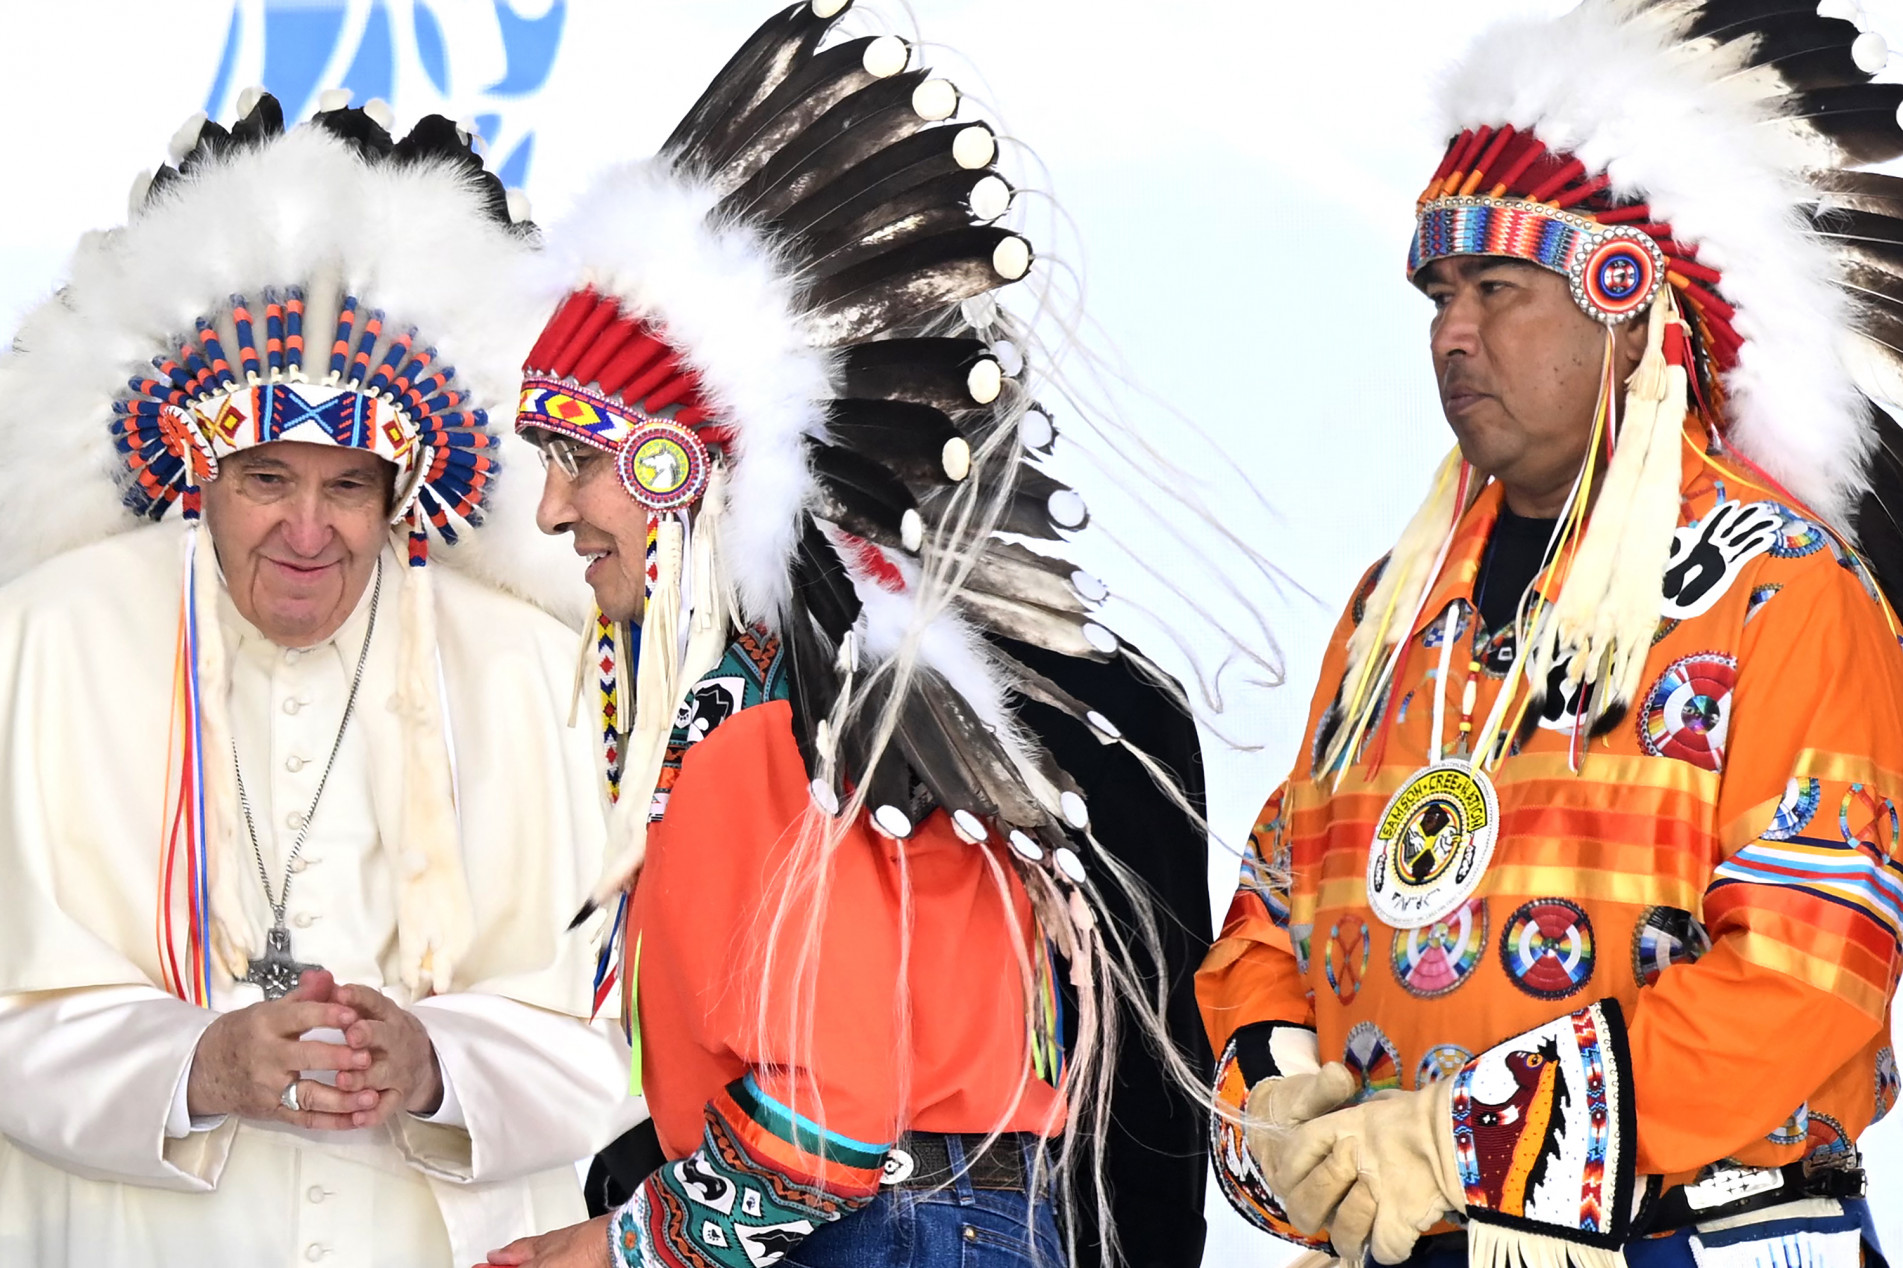  Pope Francis wears a headdress presented to him by Indigenous leaders at Muskwa Park in Maskwacis, Alberta, Canada, on July 25, 2022. - Pope Francis will make a historic personal apology Monday to Indigenous survivors of child abuse committed over decades at Catholic-run institutions in Canada, at the start of a week-long visit he has described as a 